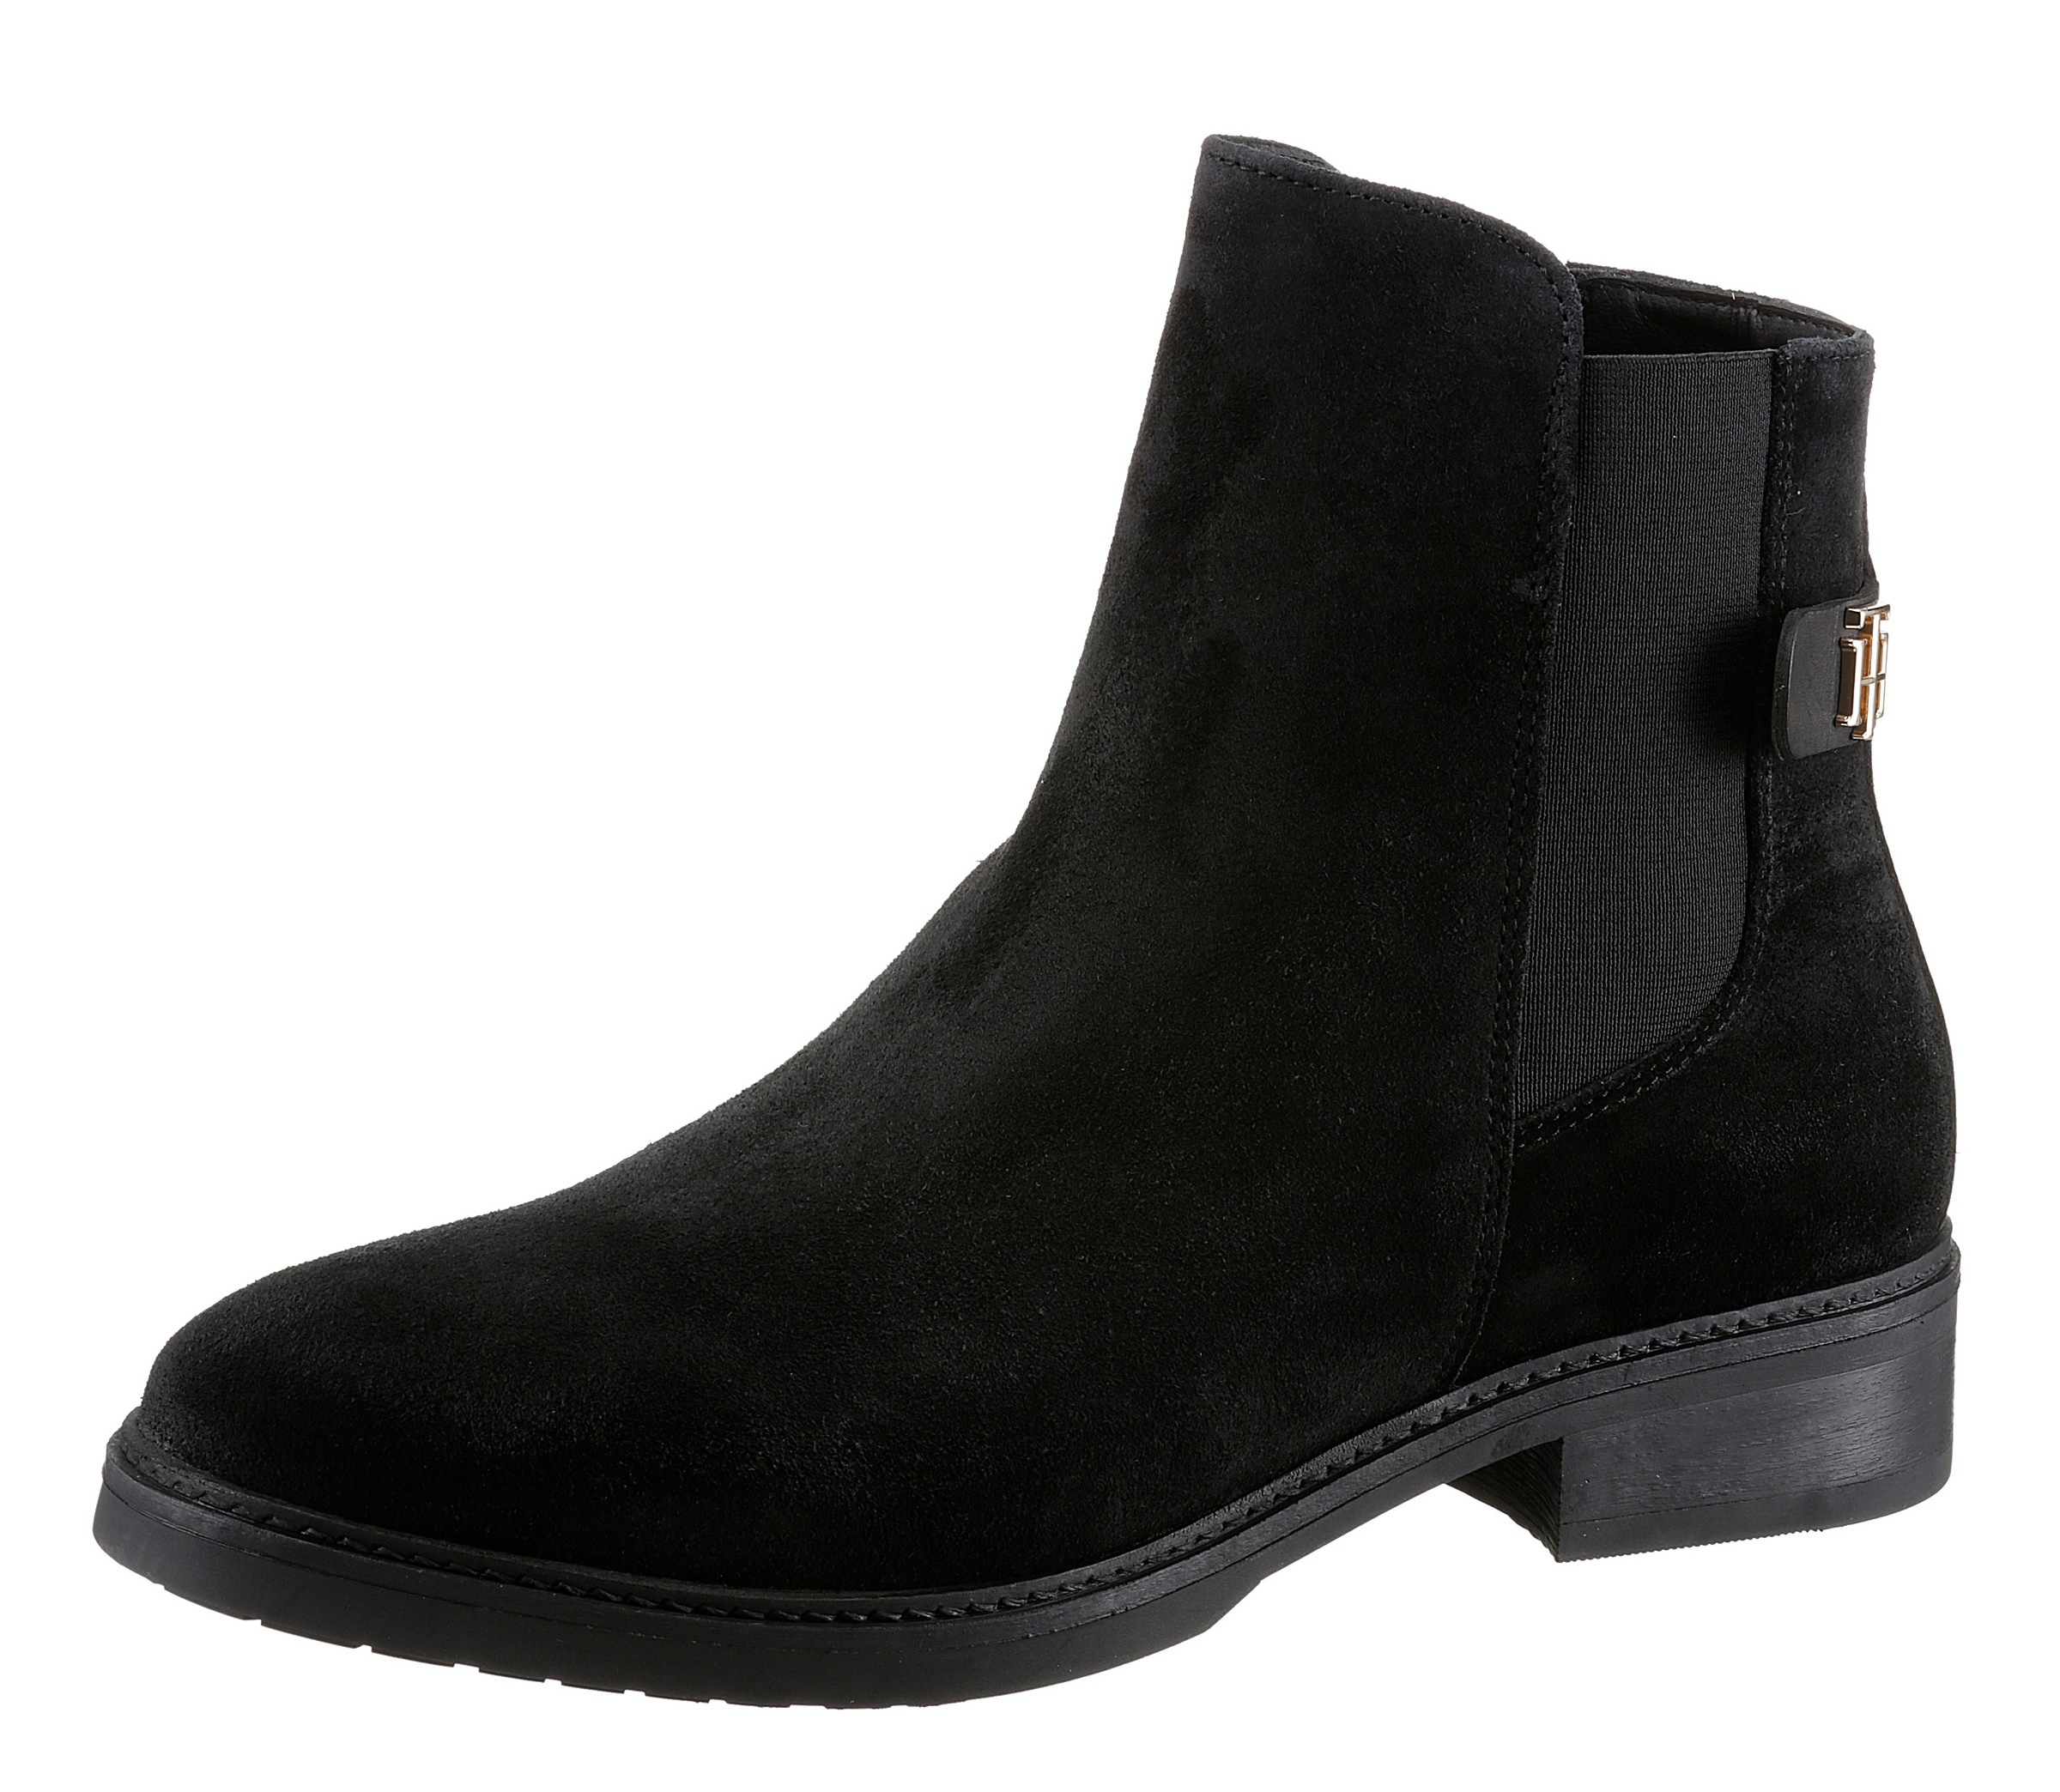 TOMMY HILFIGER Chelseaboots »TH SUEDE FLAT BOOT« su T...